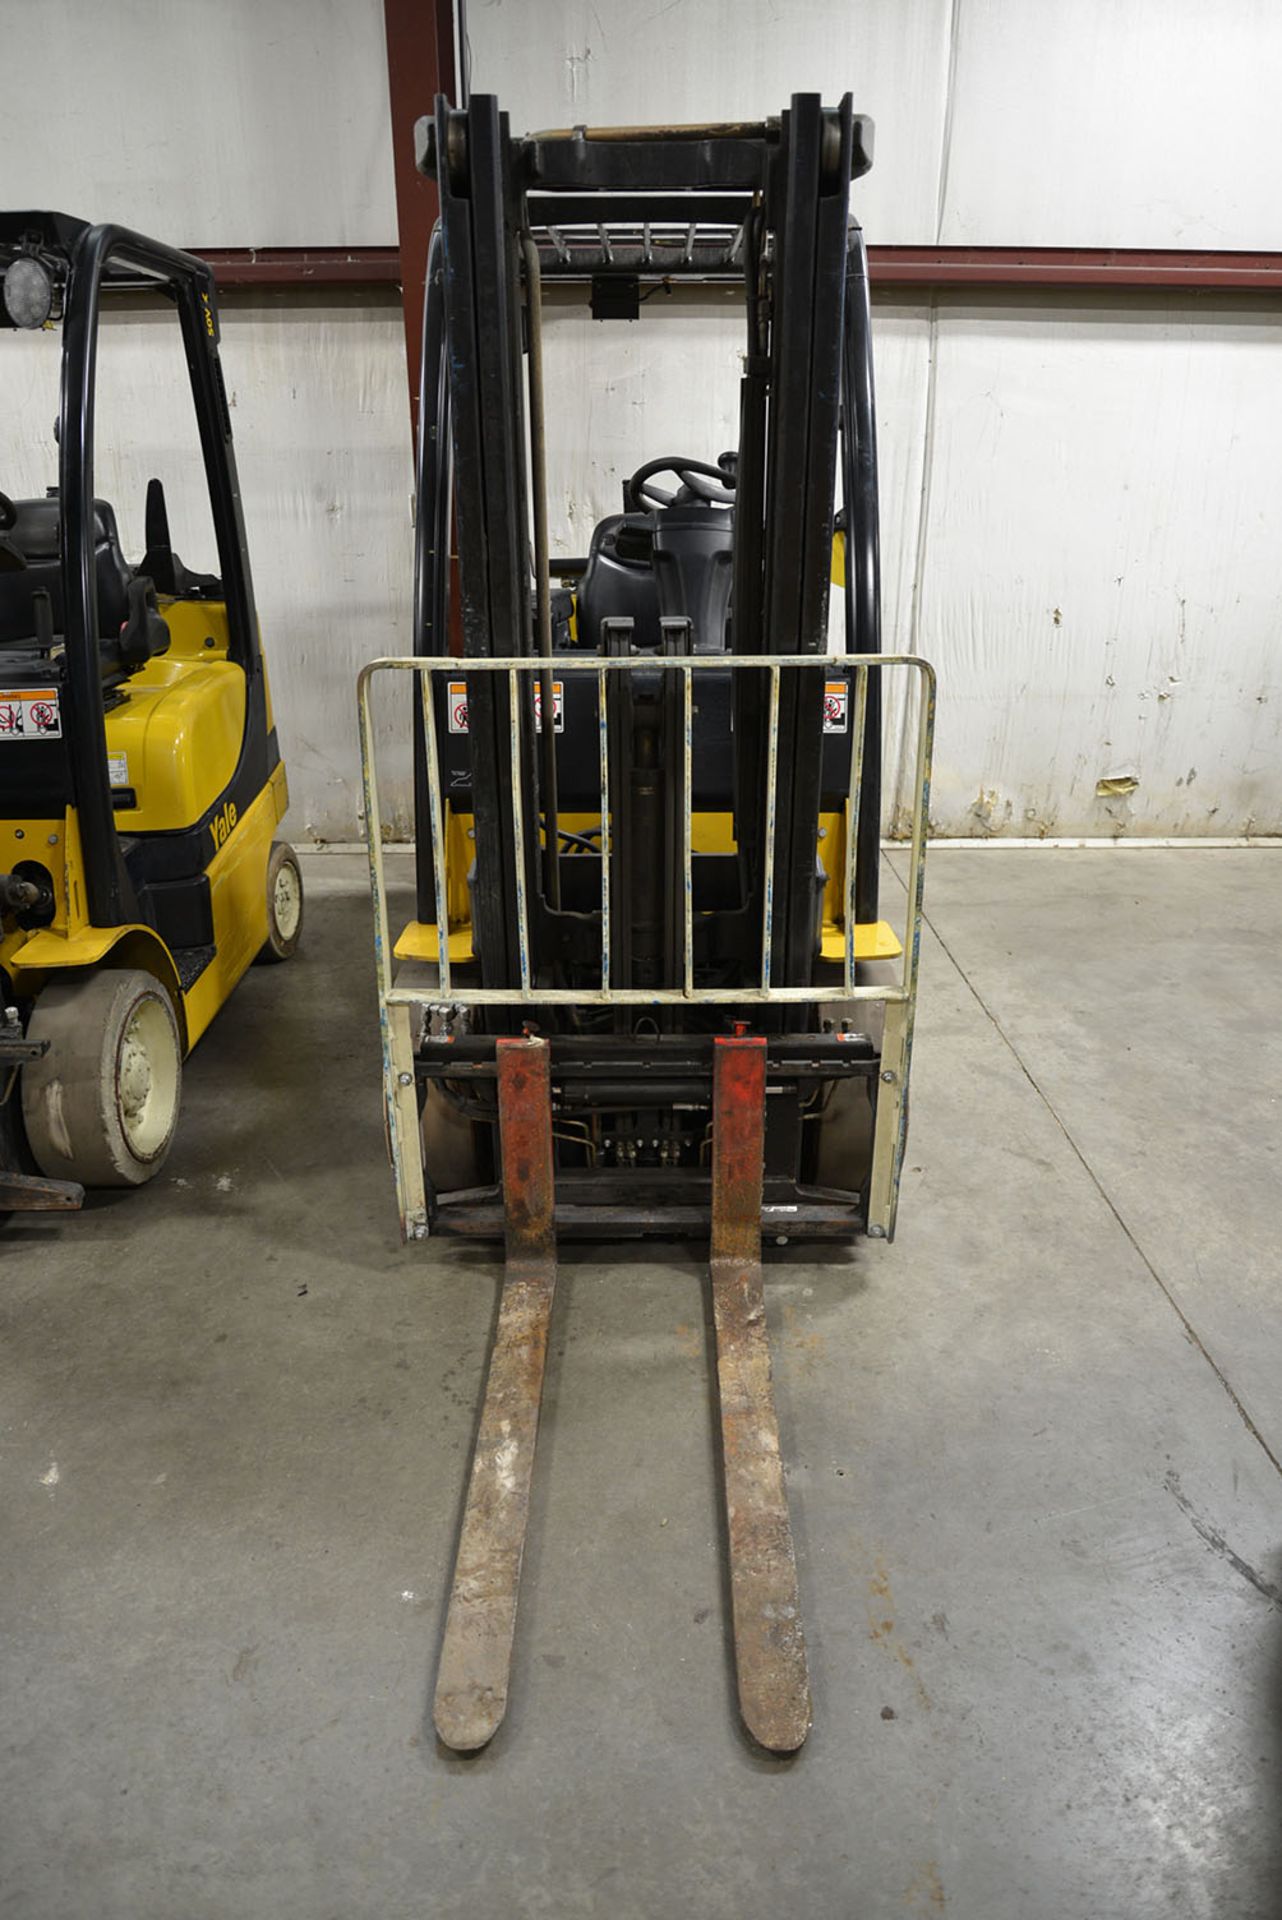 2008 YALE 5,000-lb. Capacity Forklift, Model GLC050VXNV, S/N A910V13935F, LPG, Solid Non-Marking - Image 2 of 7